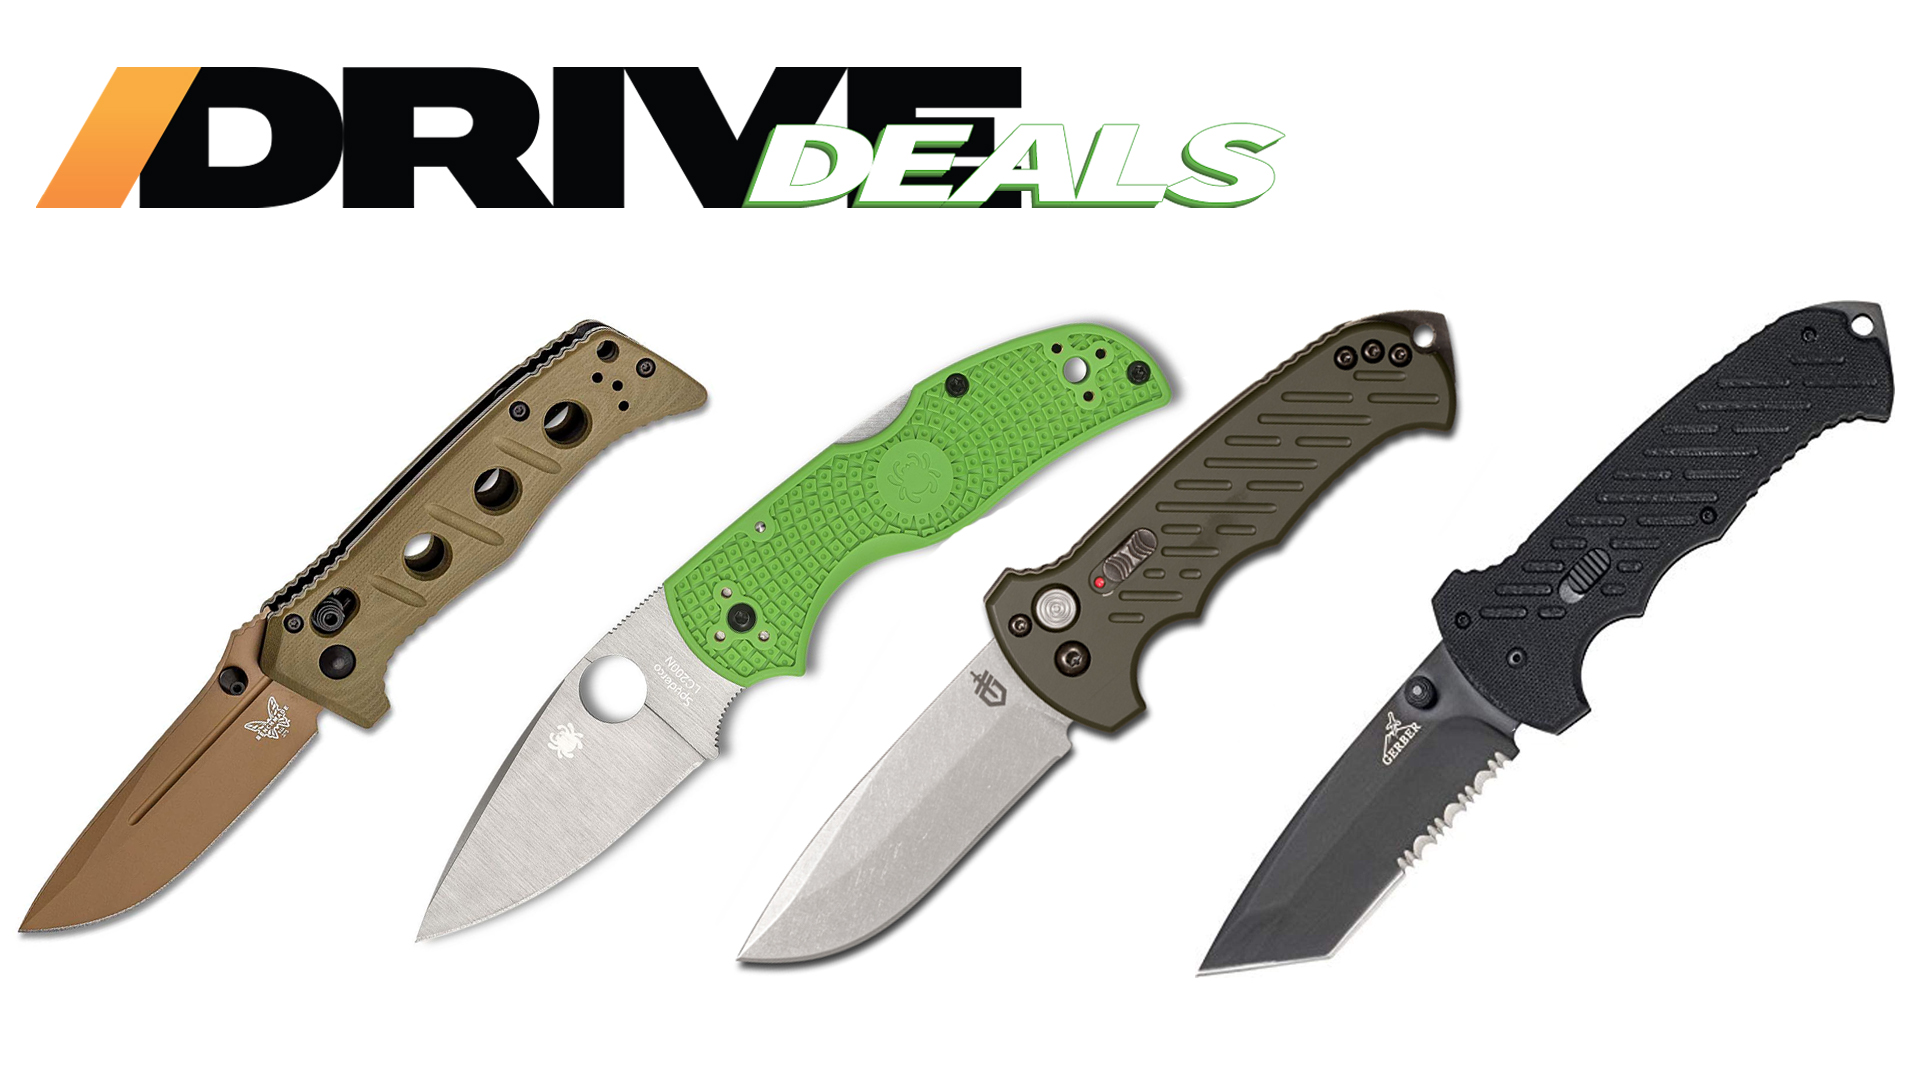 The 20 Best Cyber Monday Deals On Pocket Knives - BroBible